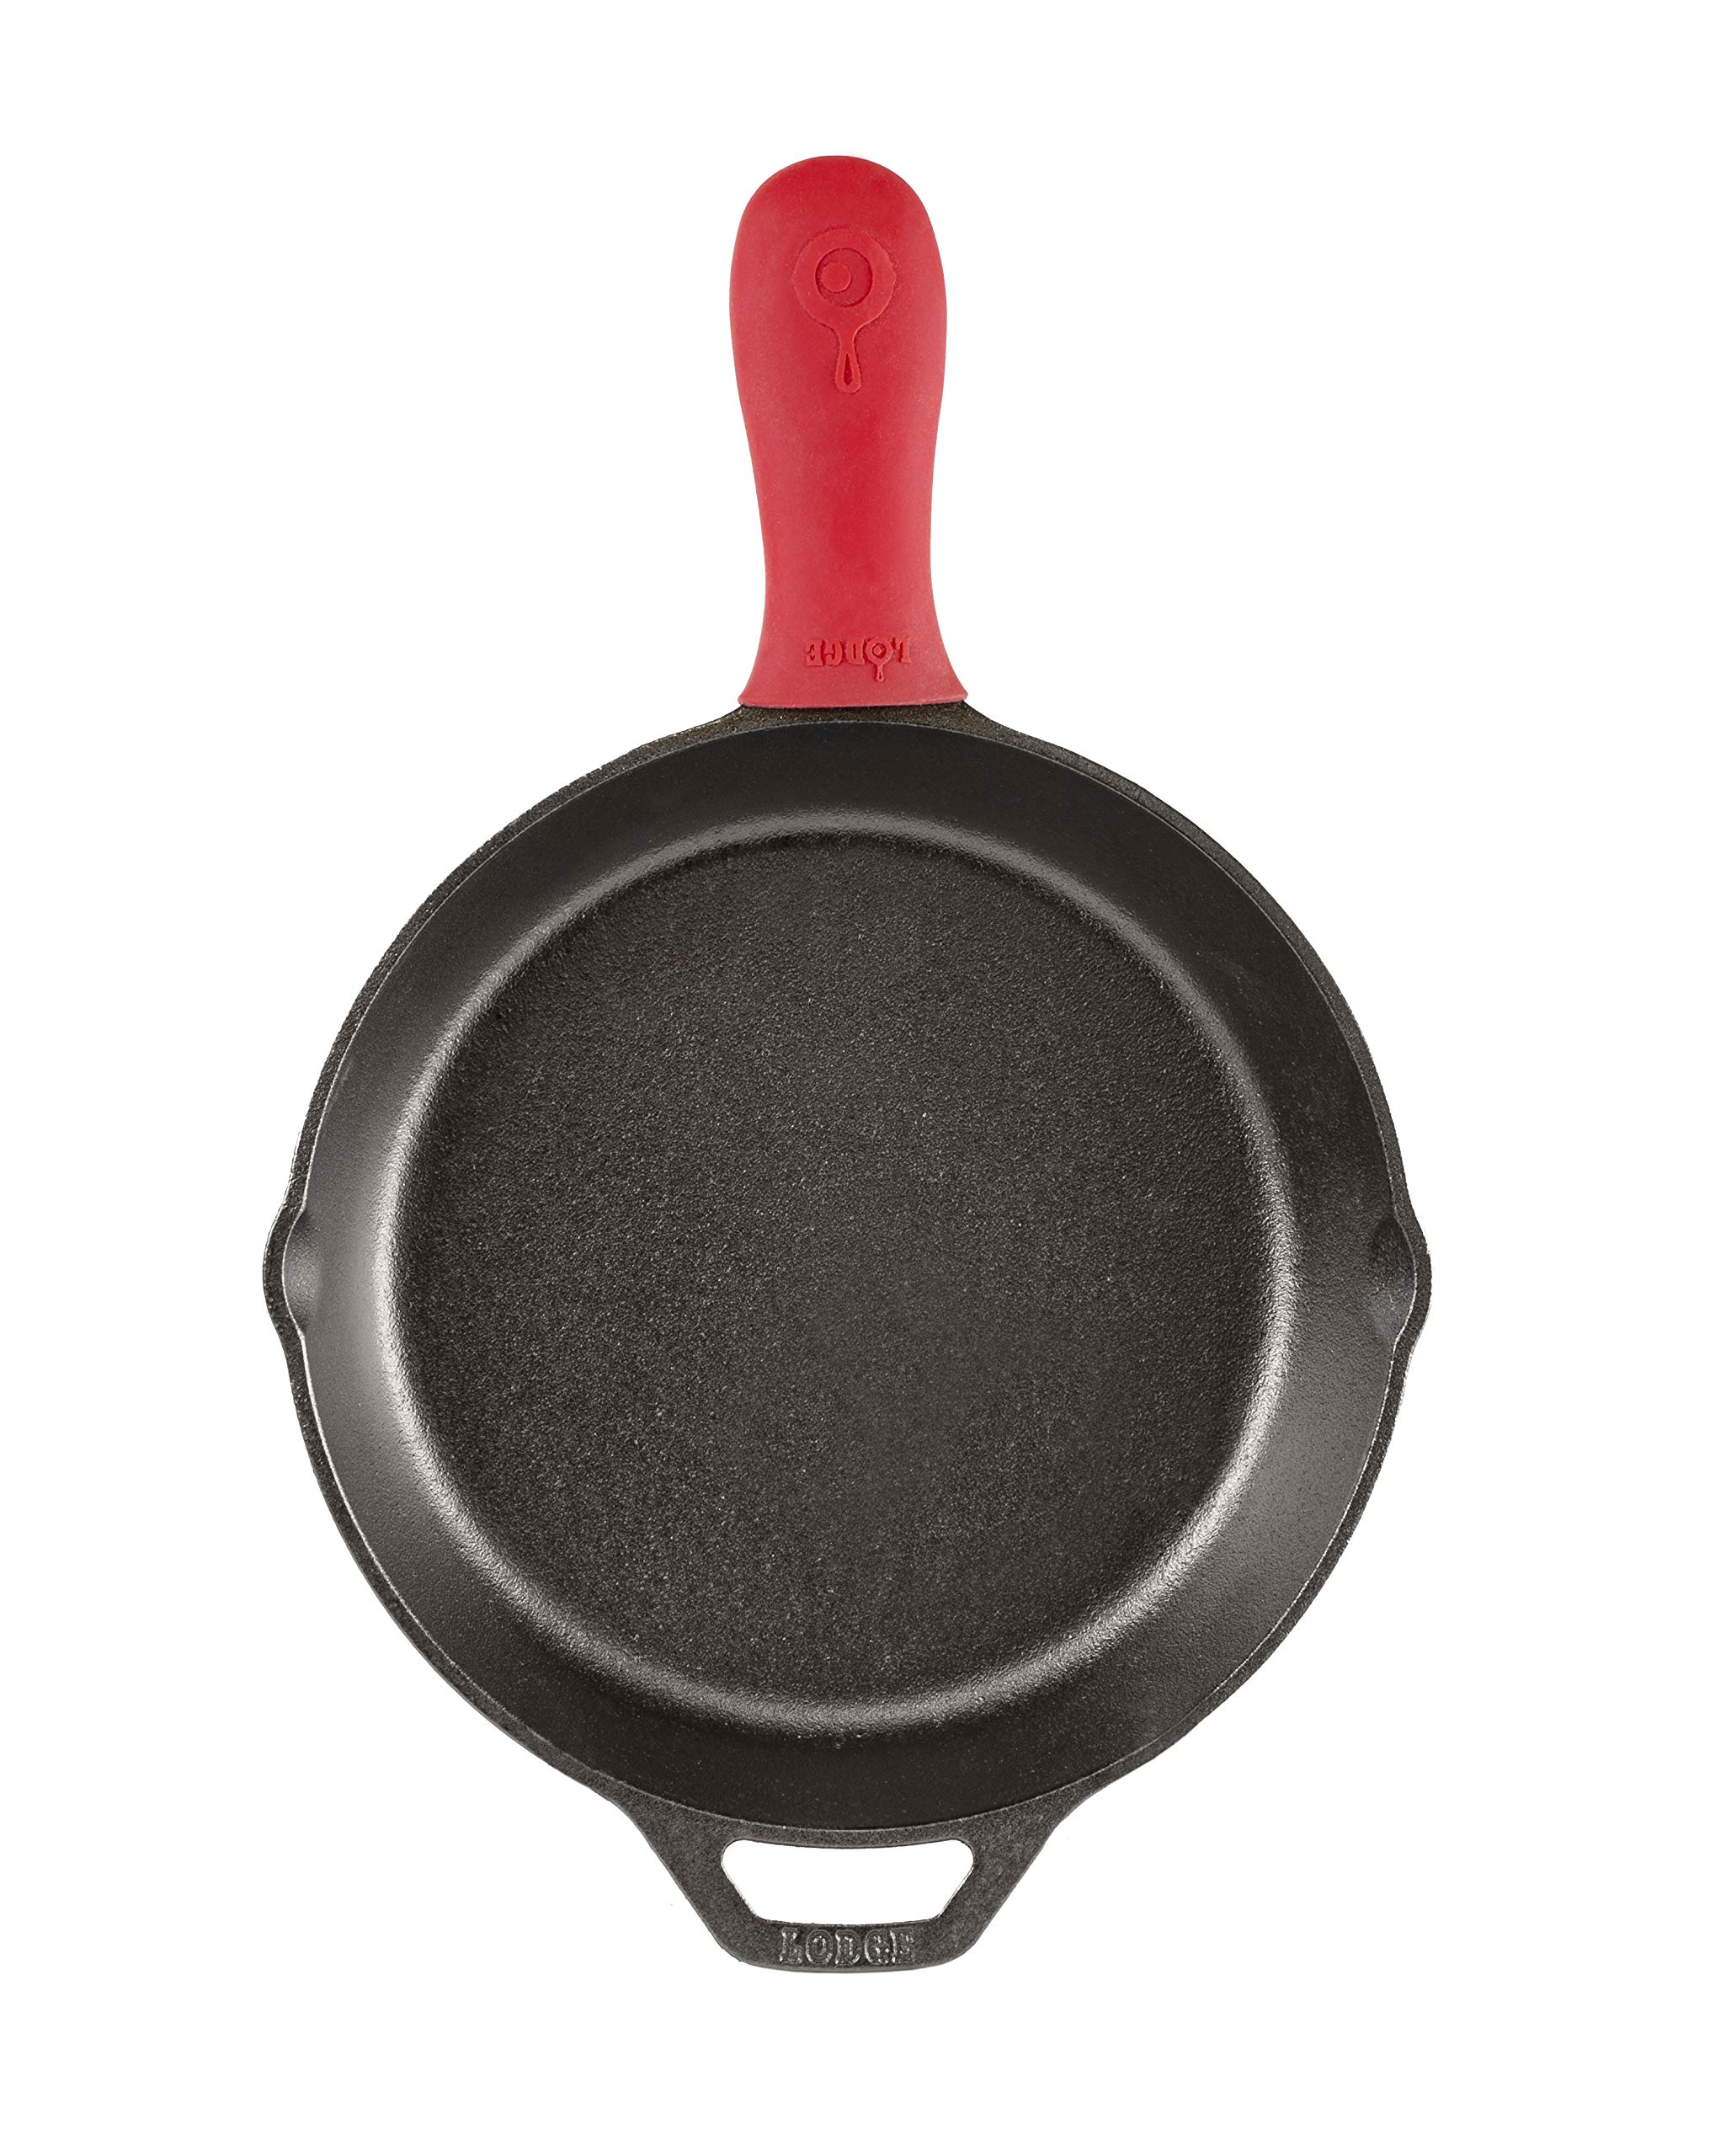 Lodge Cast Iron Skillet with Red Silicone Hot Handle Holder, 10.25-inch & ASAHH41 Silicone Assist Handle Holder, Red, 5.5" x 2"